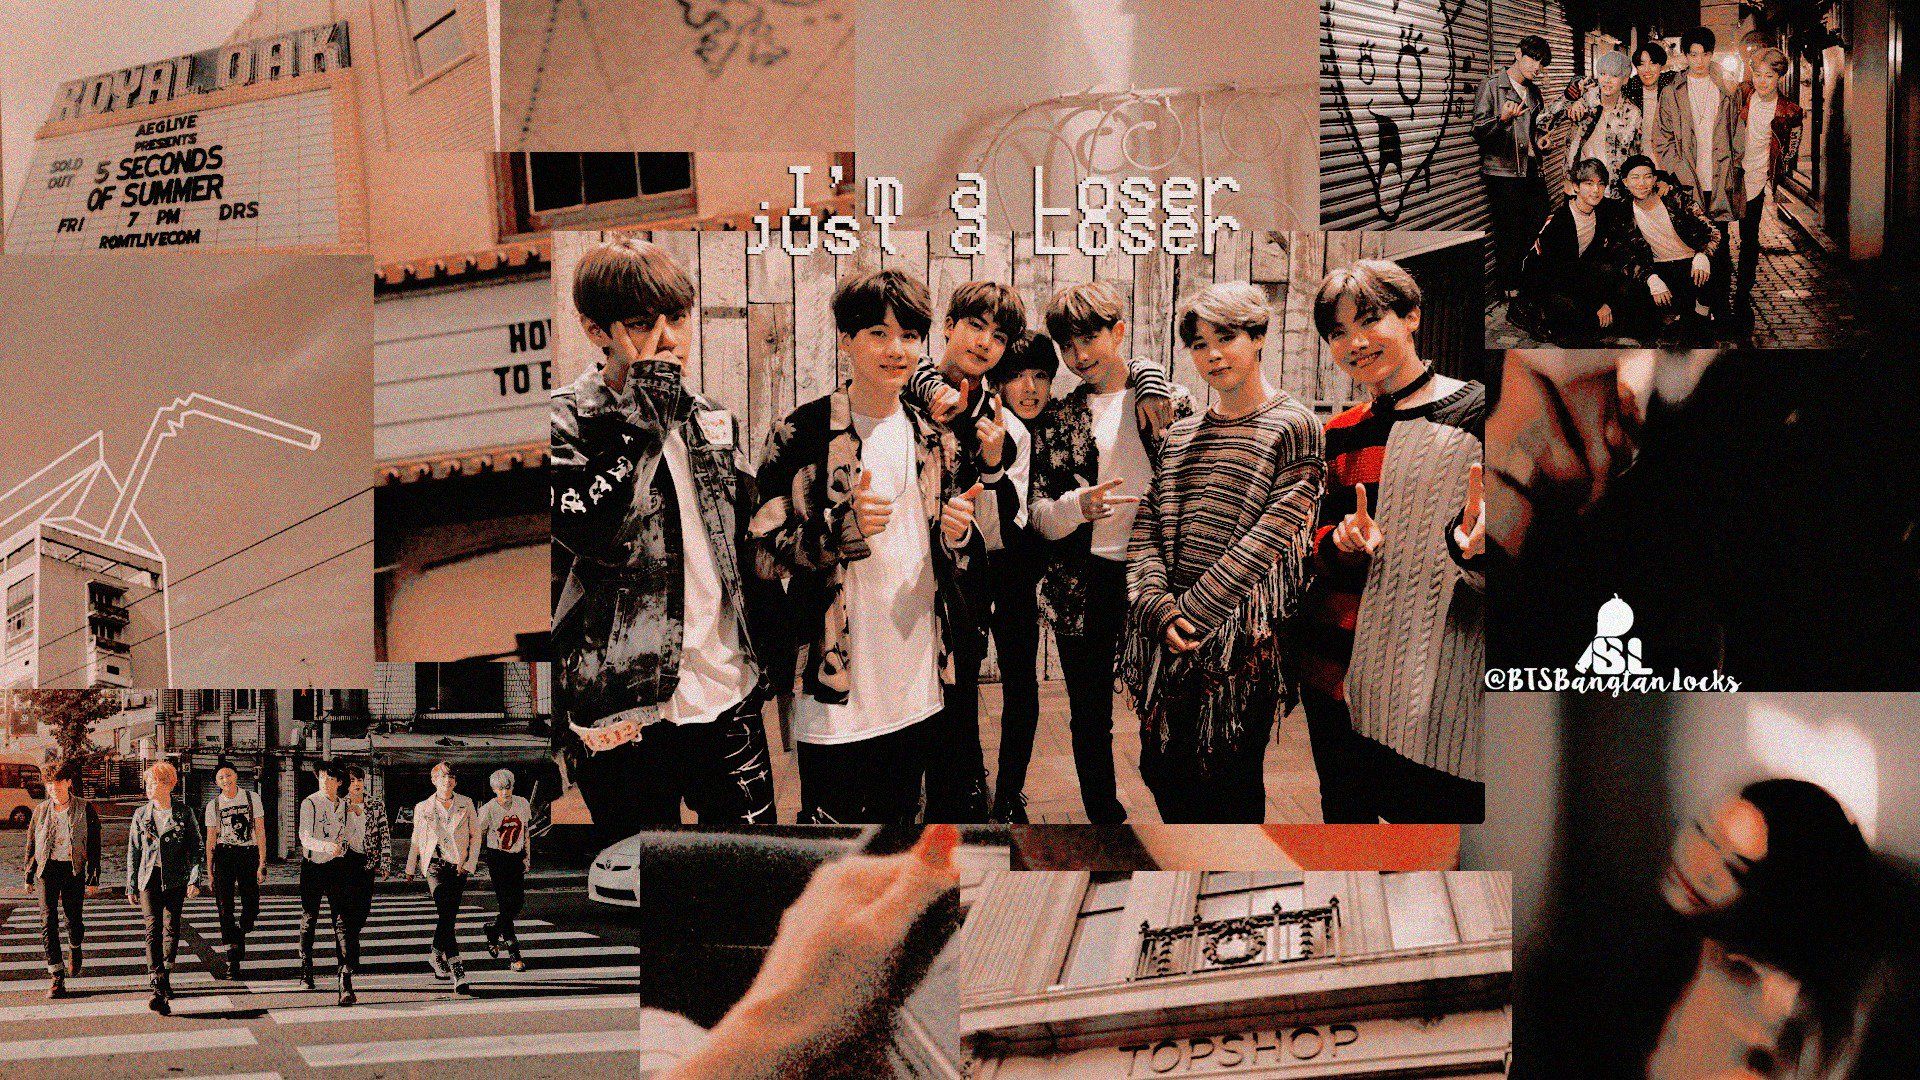 Bangtan Locks - × OT7 Aesthetics Desktop Wallpaper × Rt&Fv if saved × Don't repost × Print&Mark us if used × ©to the owners by: αyυ